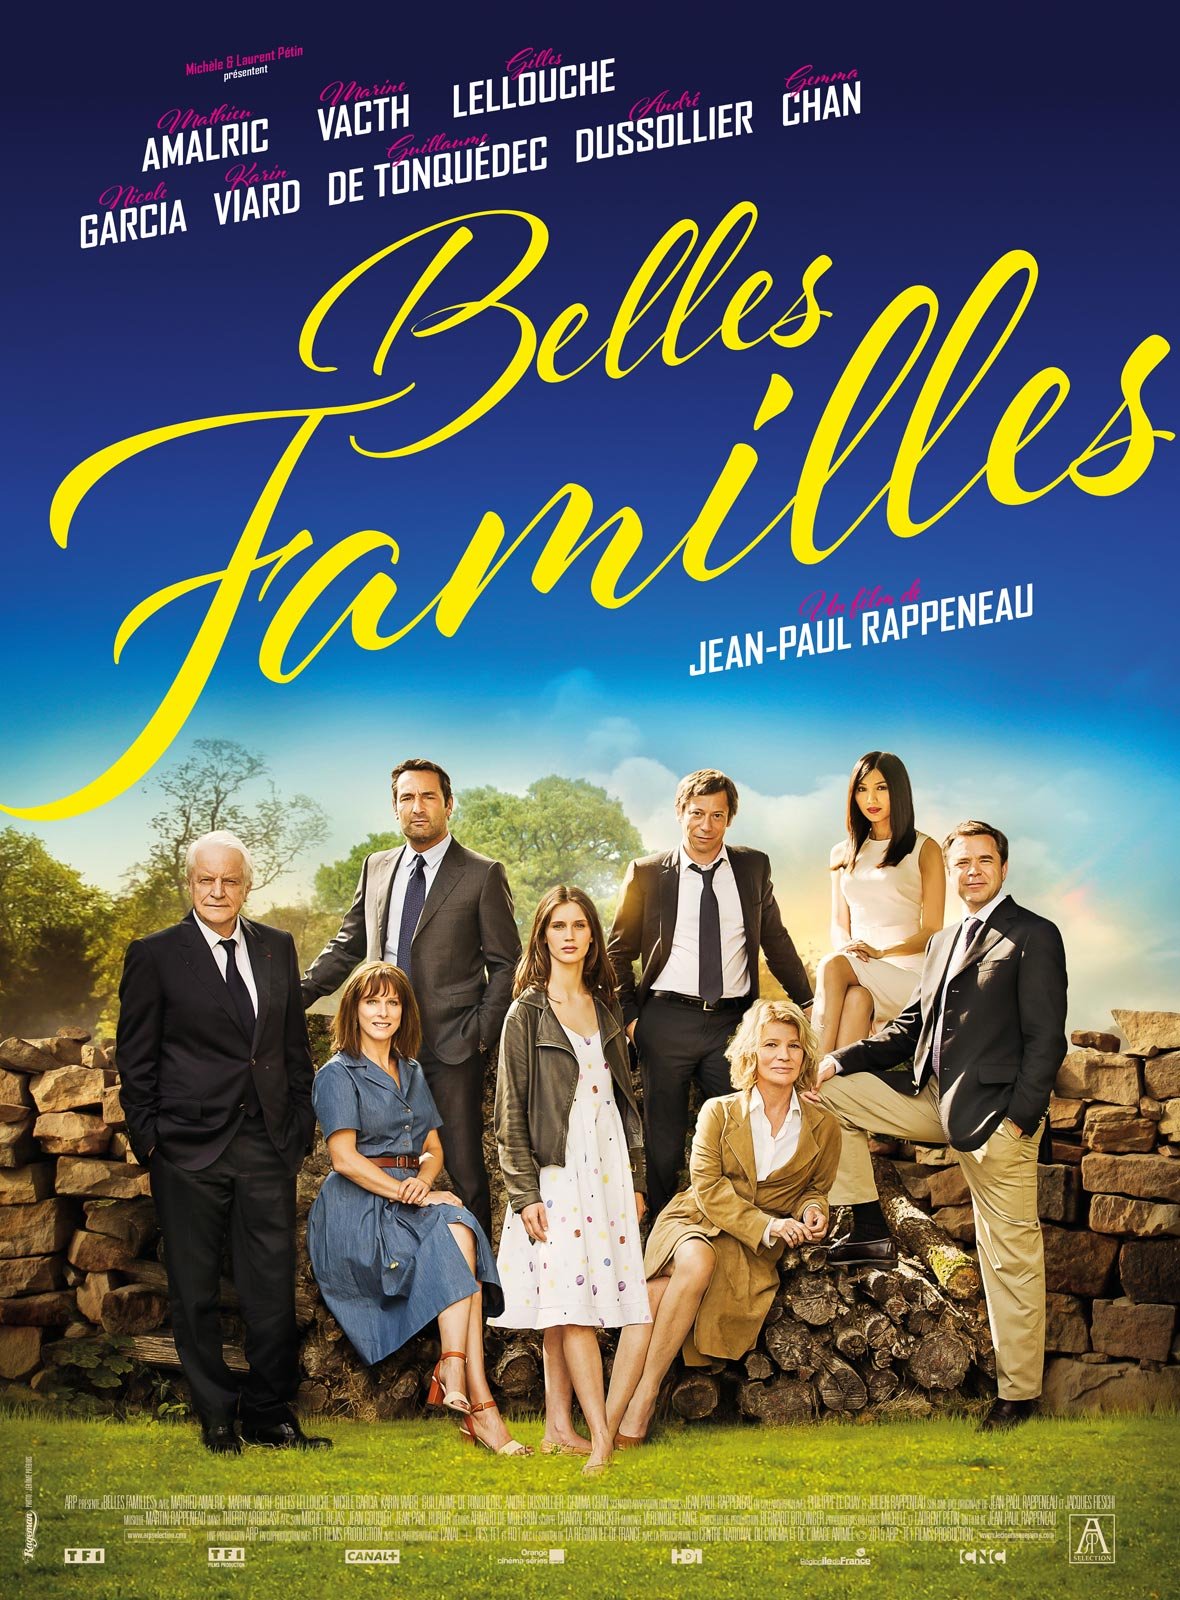 Poster of the movie Belles Familles